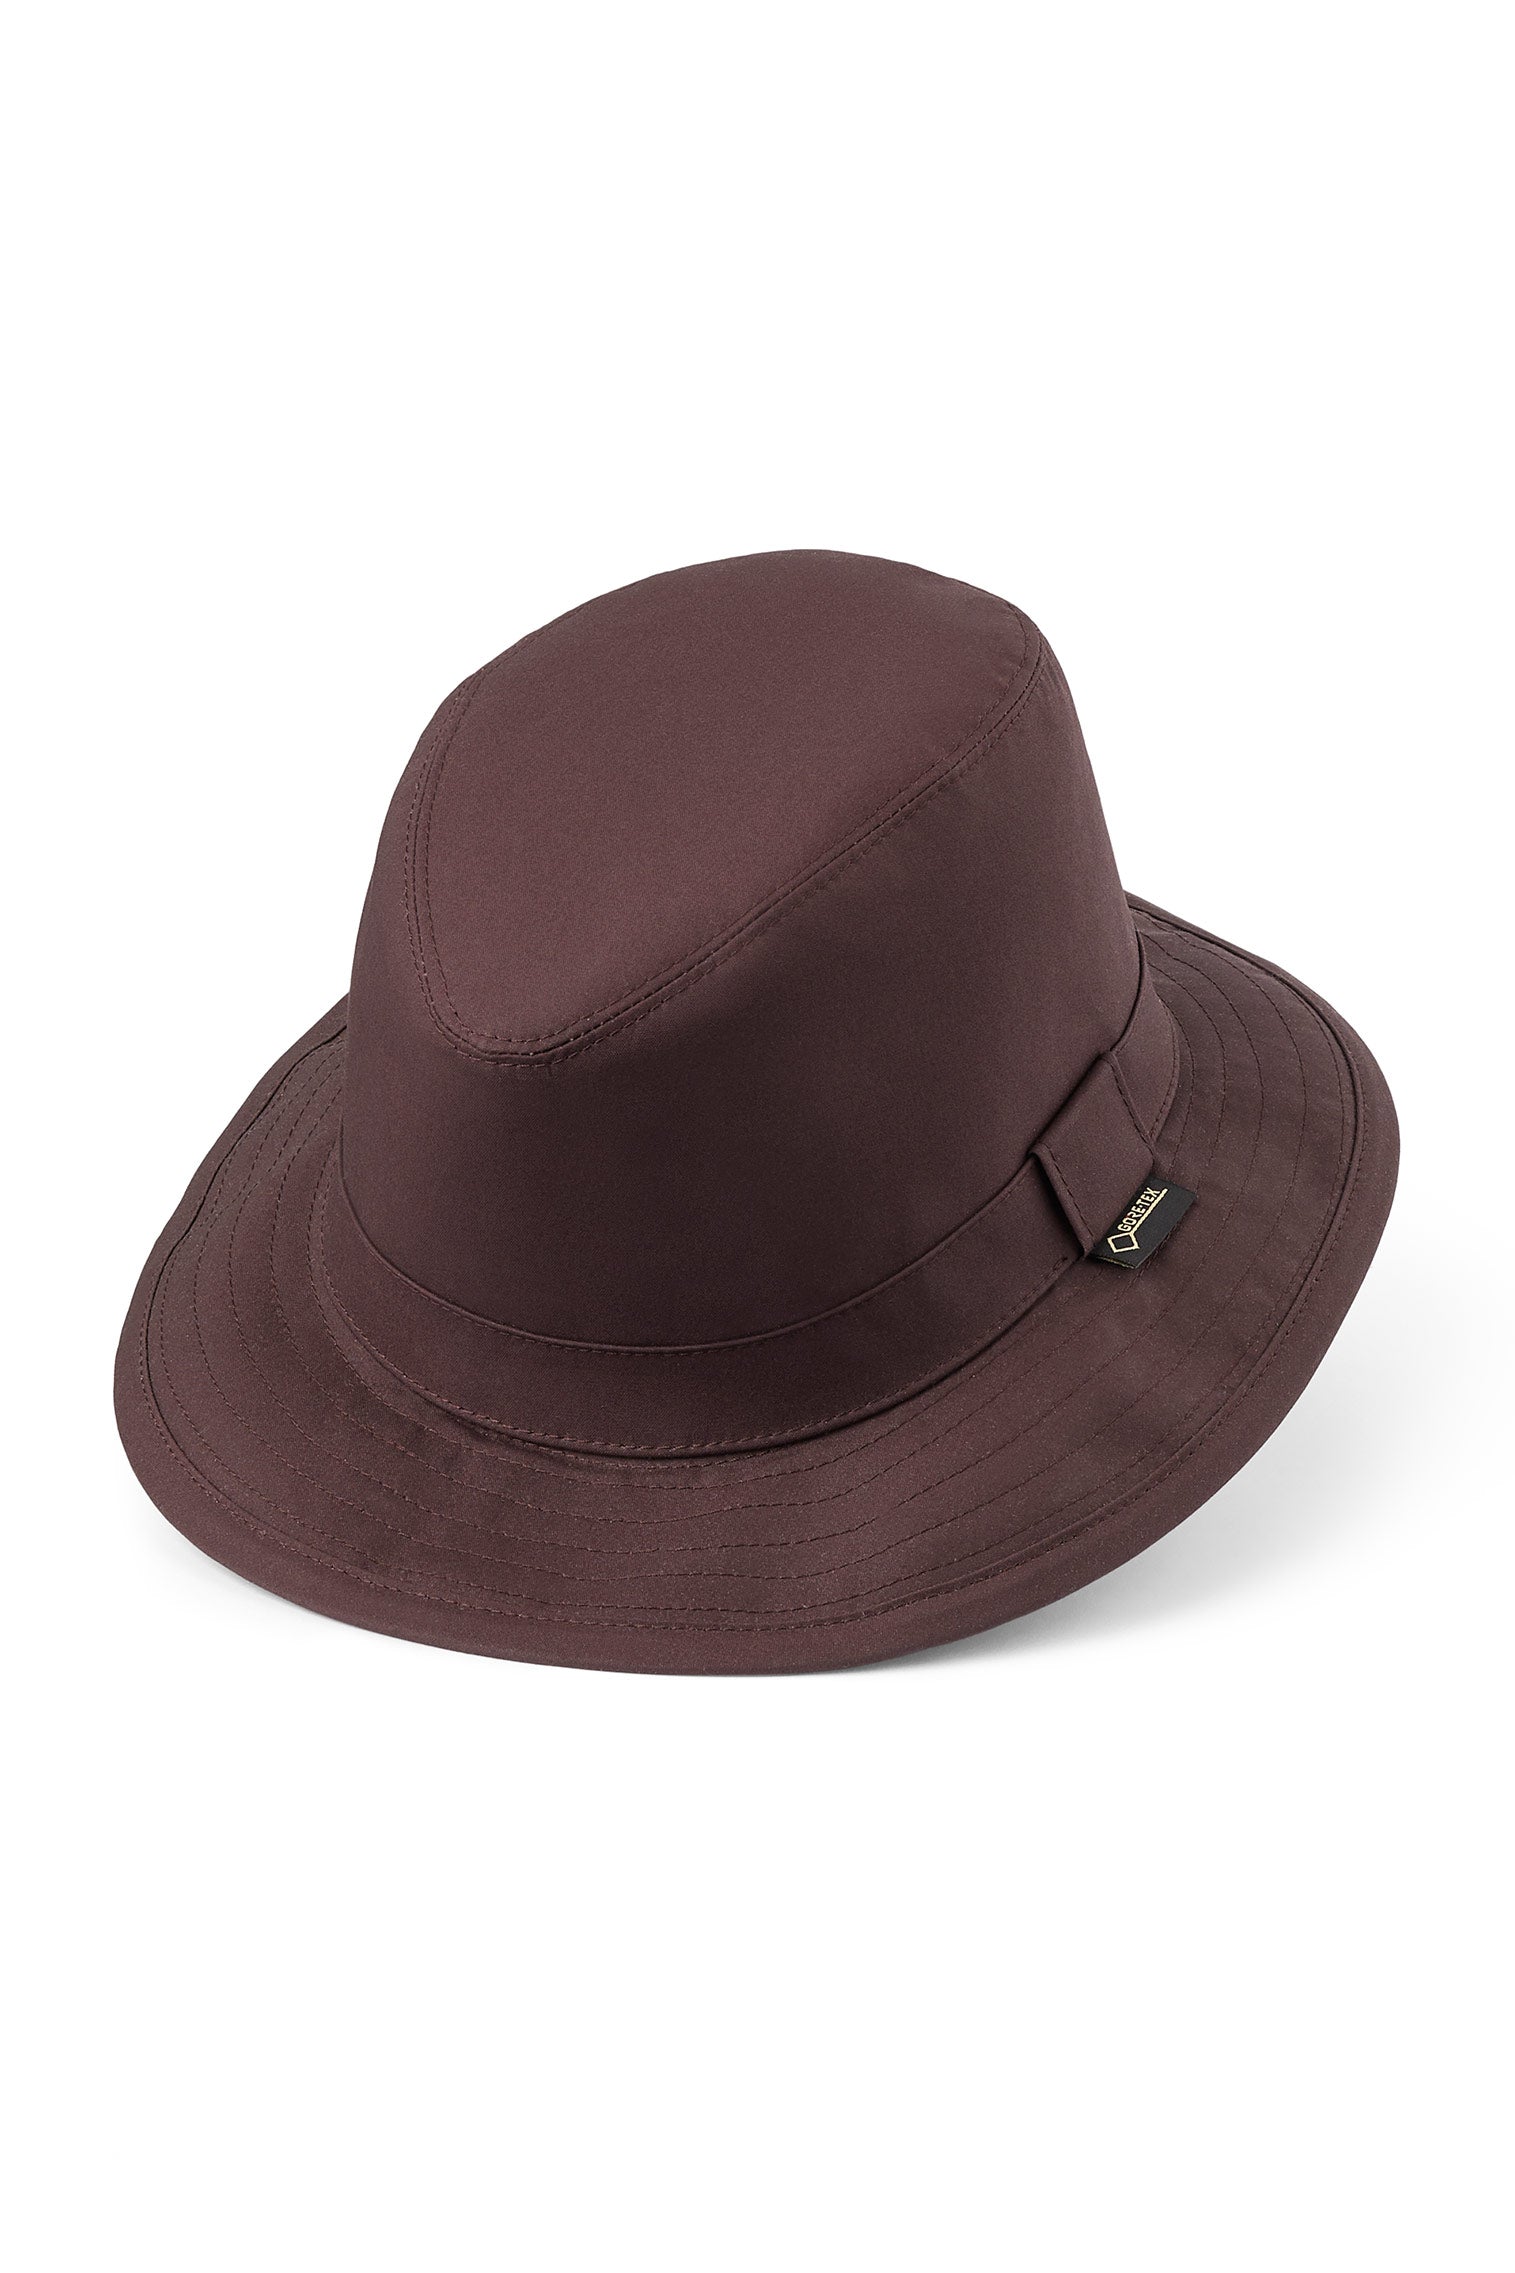 Tay GORE-TEX Hat - Hats for Tall People - Lock & Co. Hatters London UK